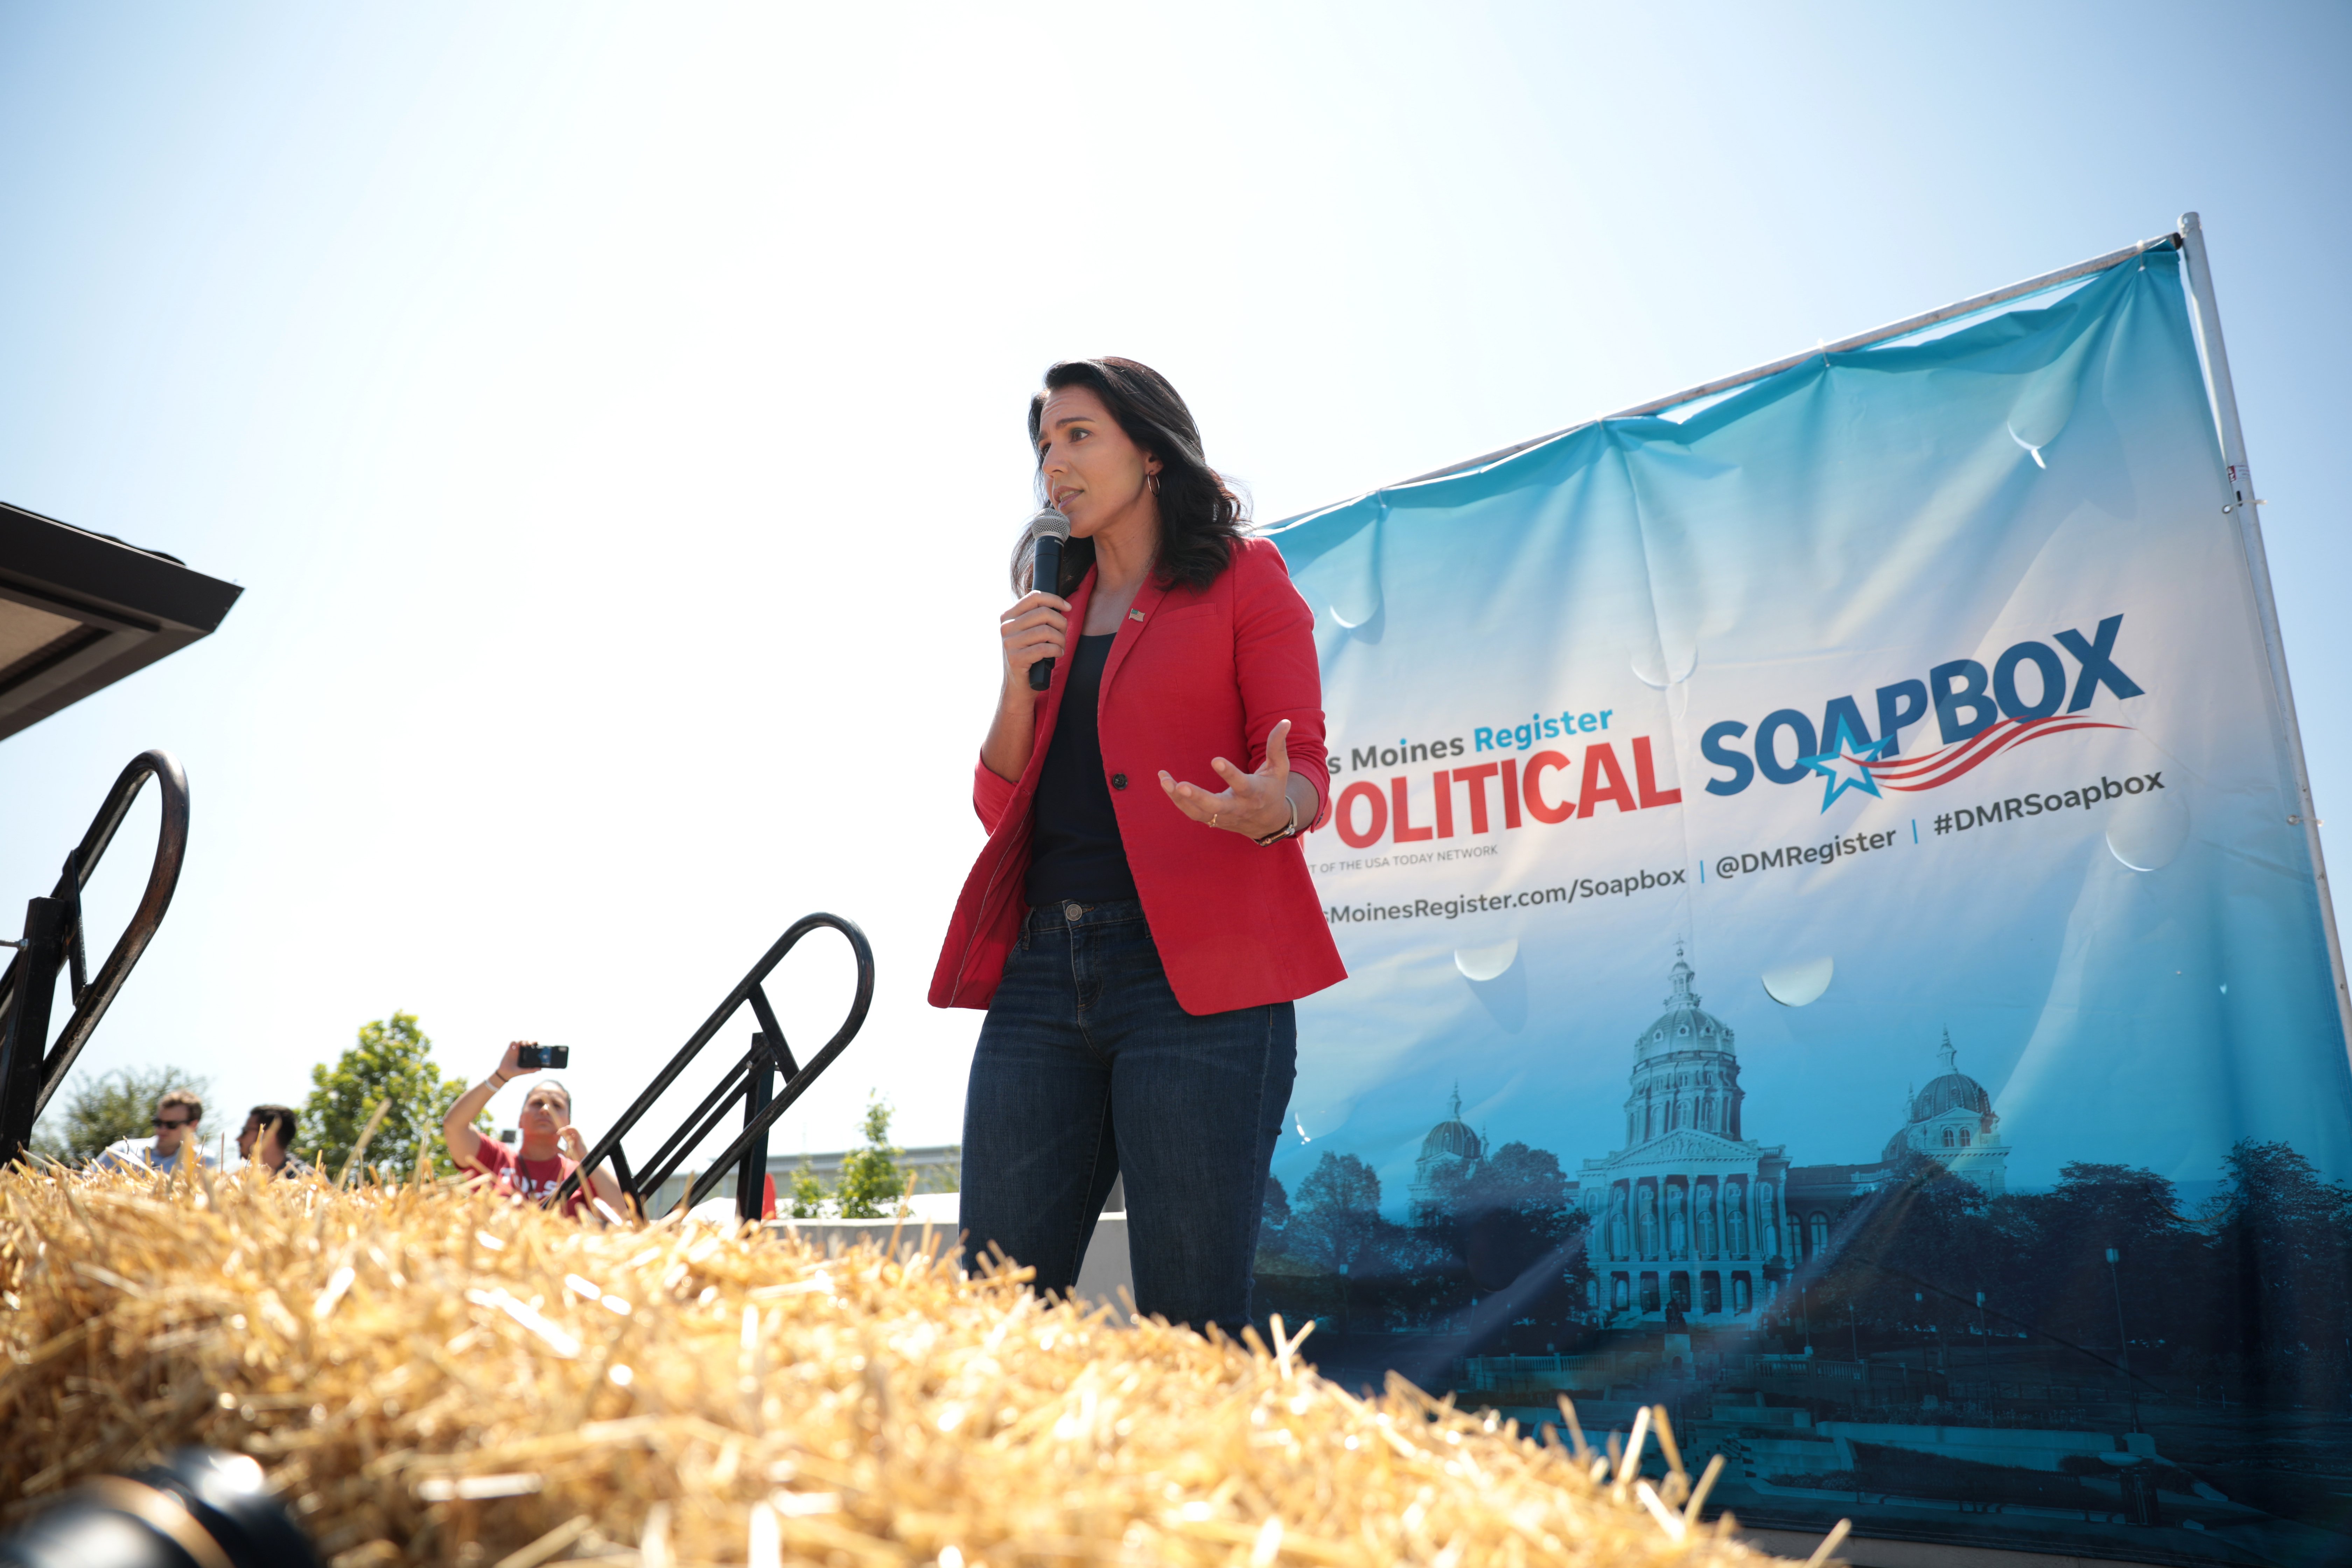 Tulsi Gabbard speaking with supporters at the Des Moines Register's Political Soapbox at the 2019 Iowa State Fair in Des Moines, Iowa. Gage Skidmore on Flicker (CC BY-SA 2.0)